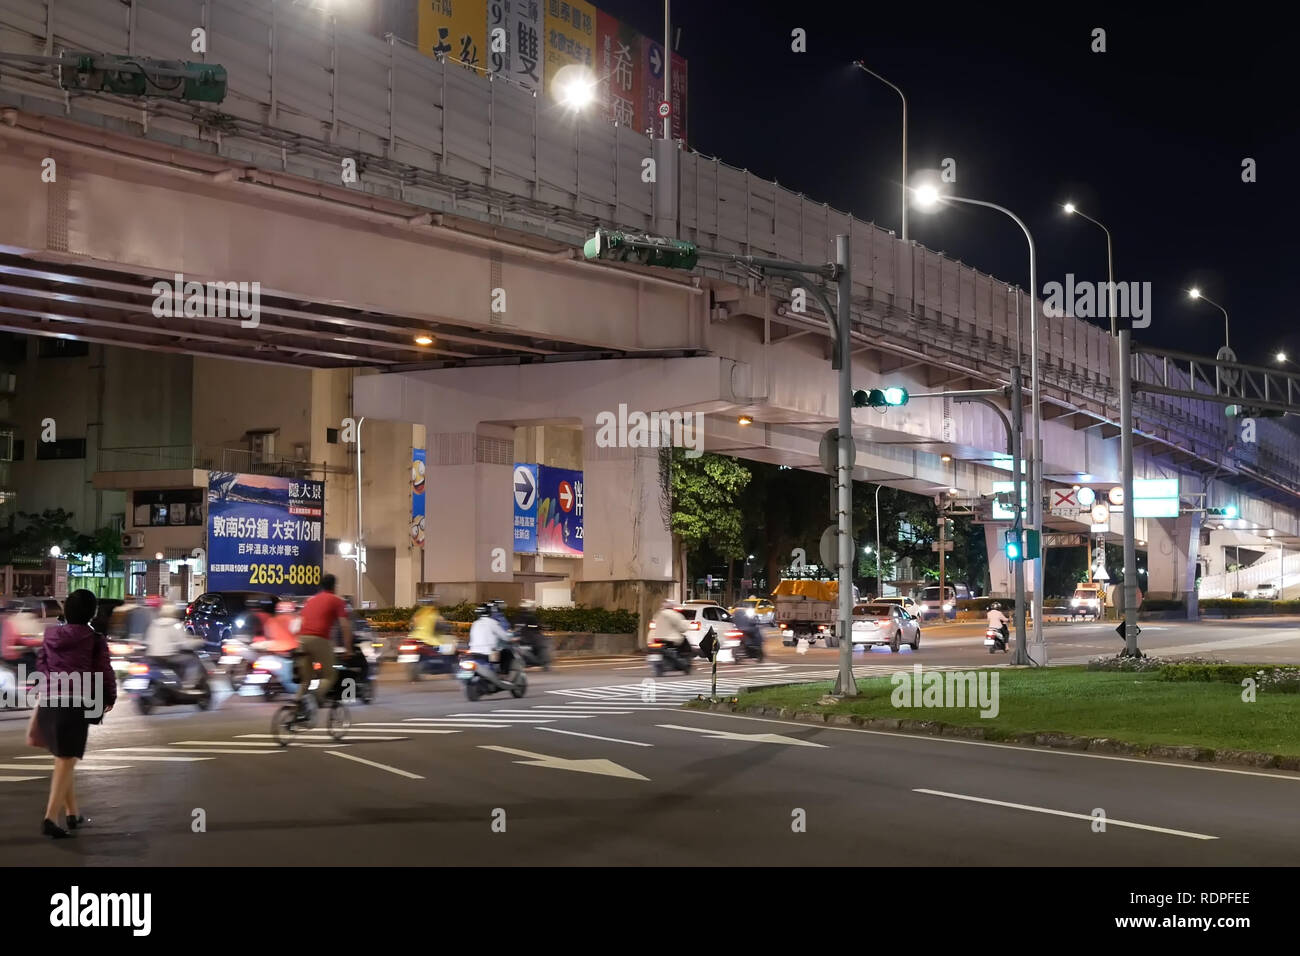 Taipei, Taiwan - November 30, 2018 : Motion of commuters and cars passing by road at night Stock Photo